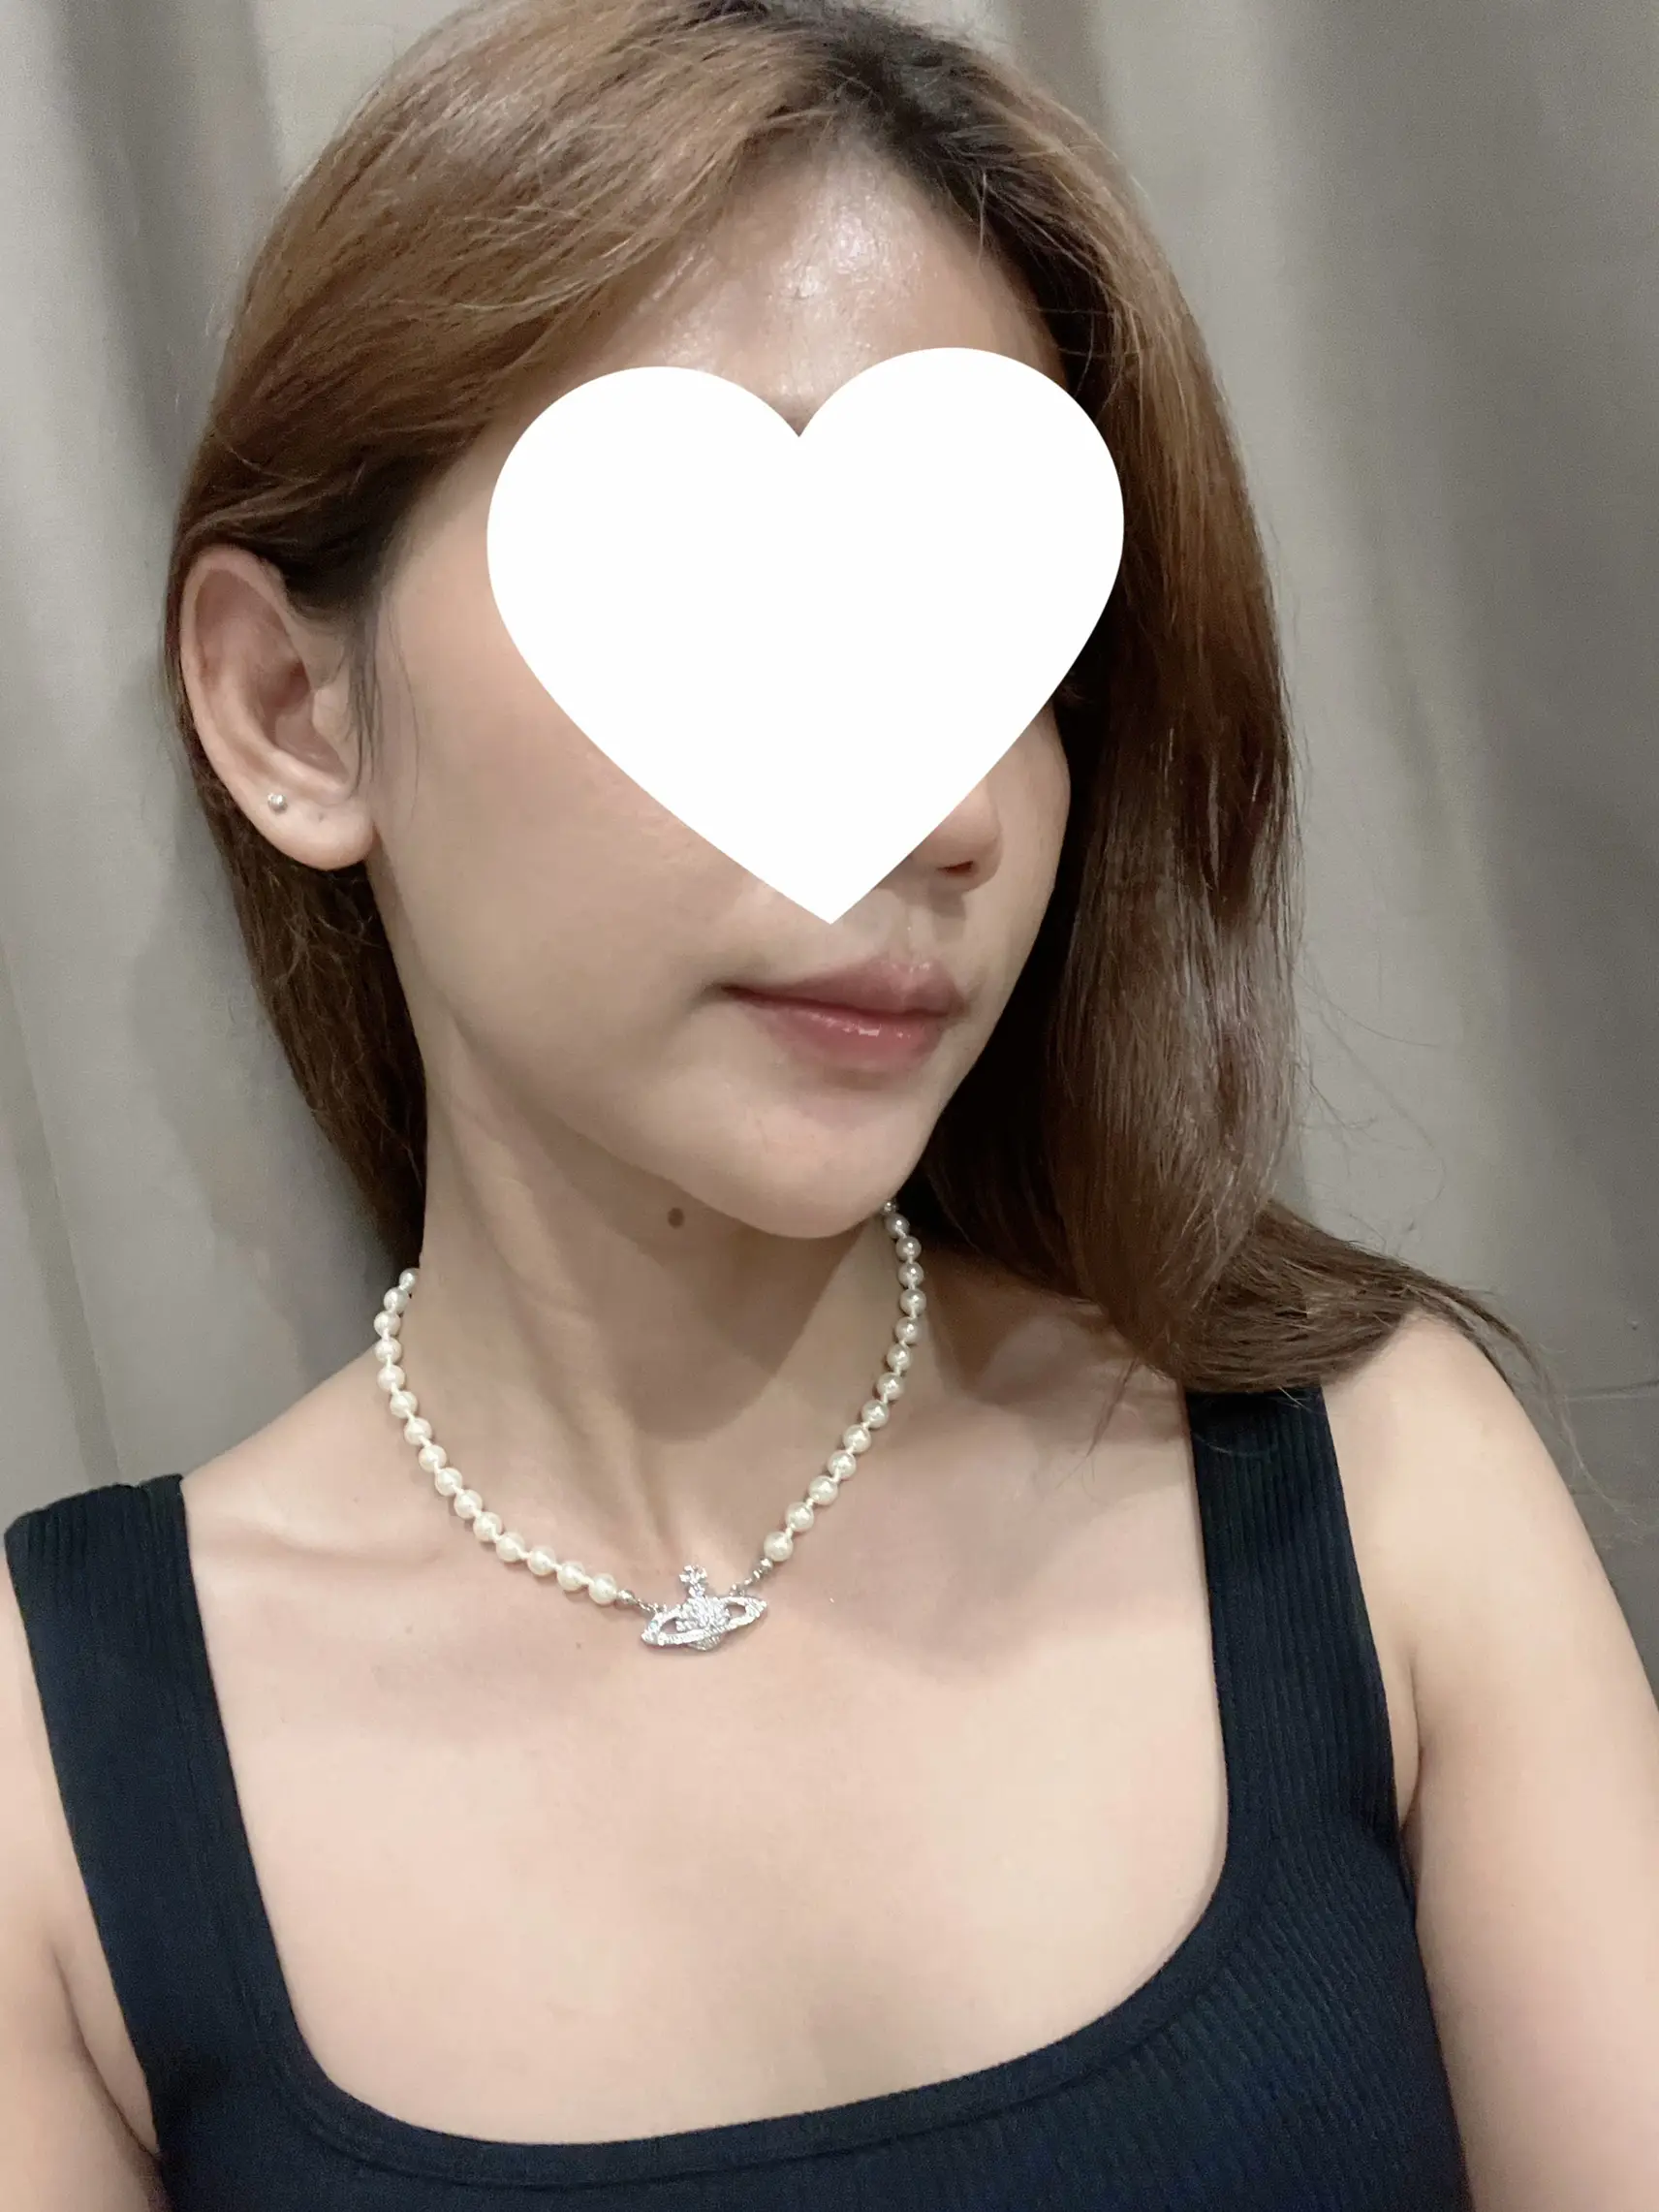 Vivienne Westwood  Pearl necklace outfit, Necklace outfit, Cute